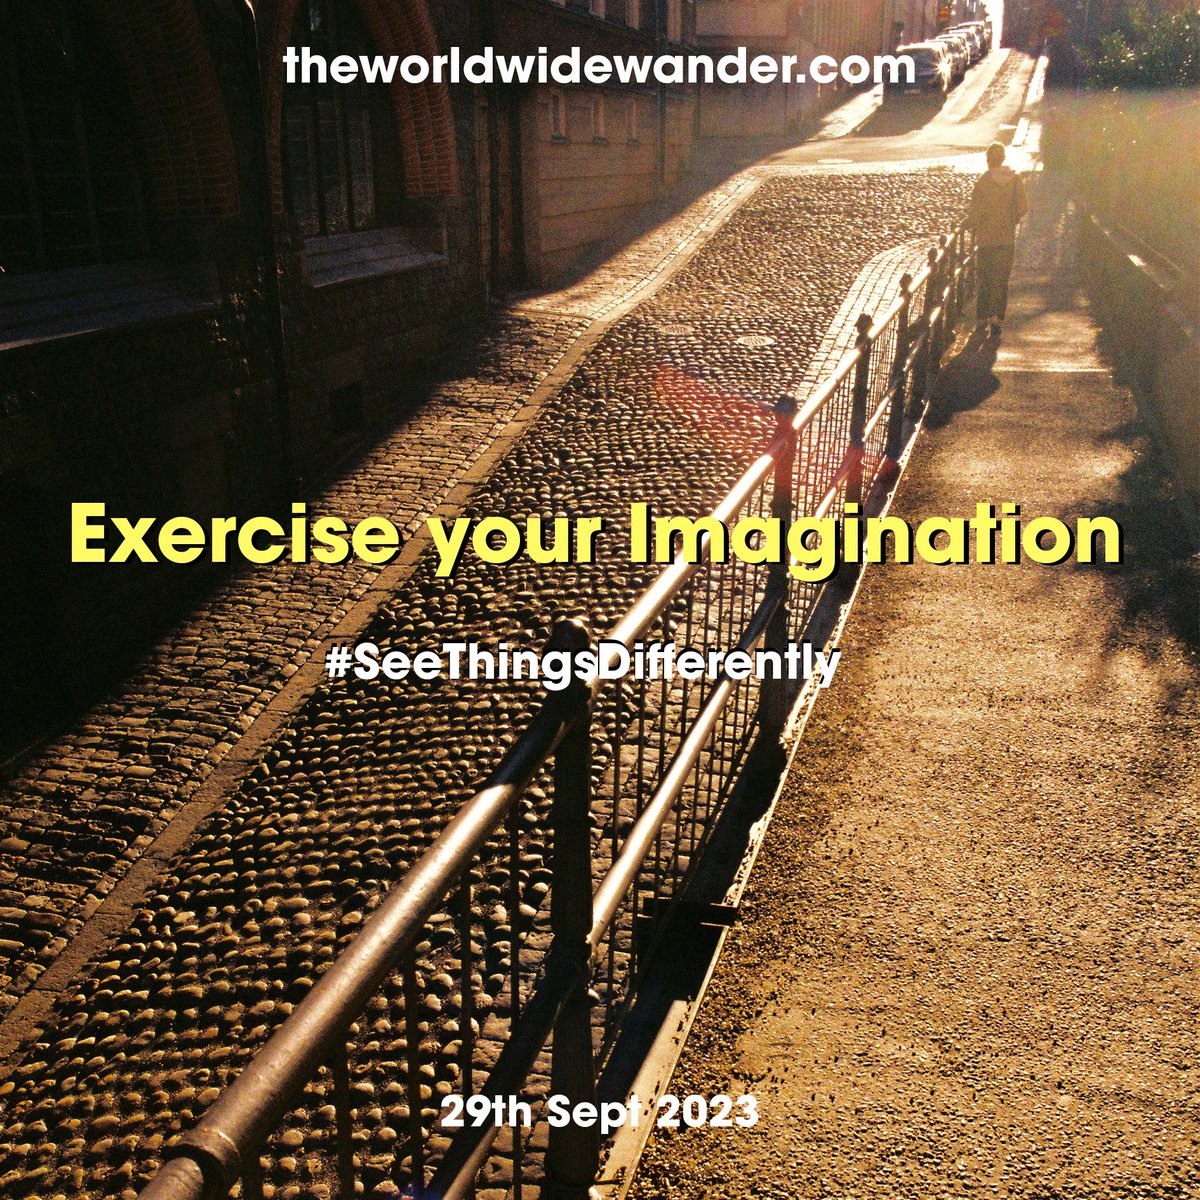 Wander with us this September! From Brisbane to Brussels, there's a workshop for everyone 🤸‍♂️ theworldwidewander.com #WorldWideWander #BetterWays #SeeThingsDifferently #AnswersAreEverywhere #WanderfulWorld #mindfulmornings #KeepWakingUp #OnlineInspirationFestival #MindfulWalk